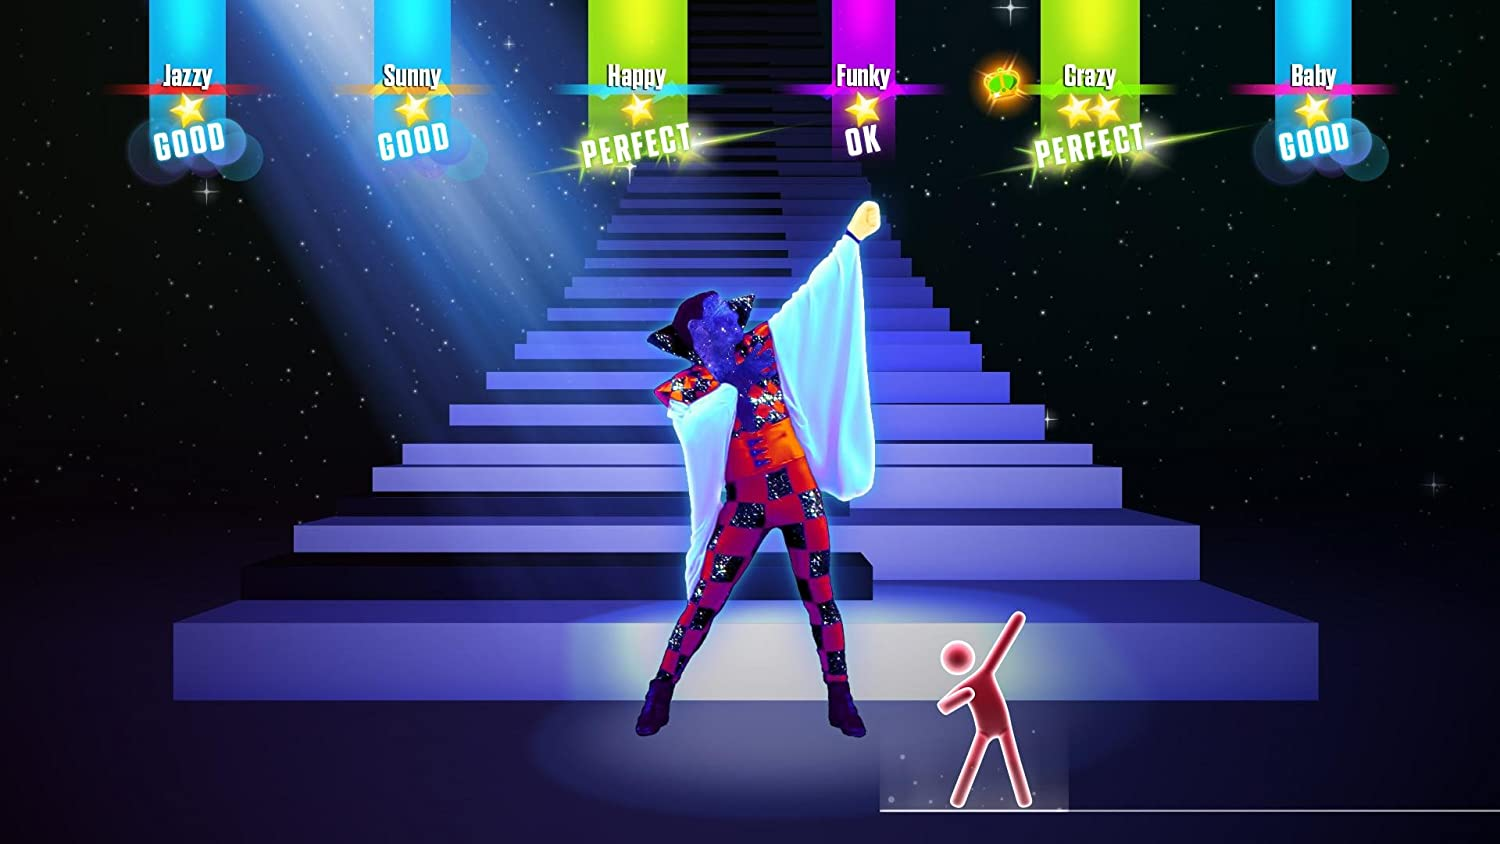 Just Dance 2017 4] - [PlayStation